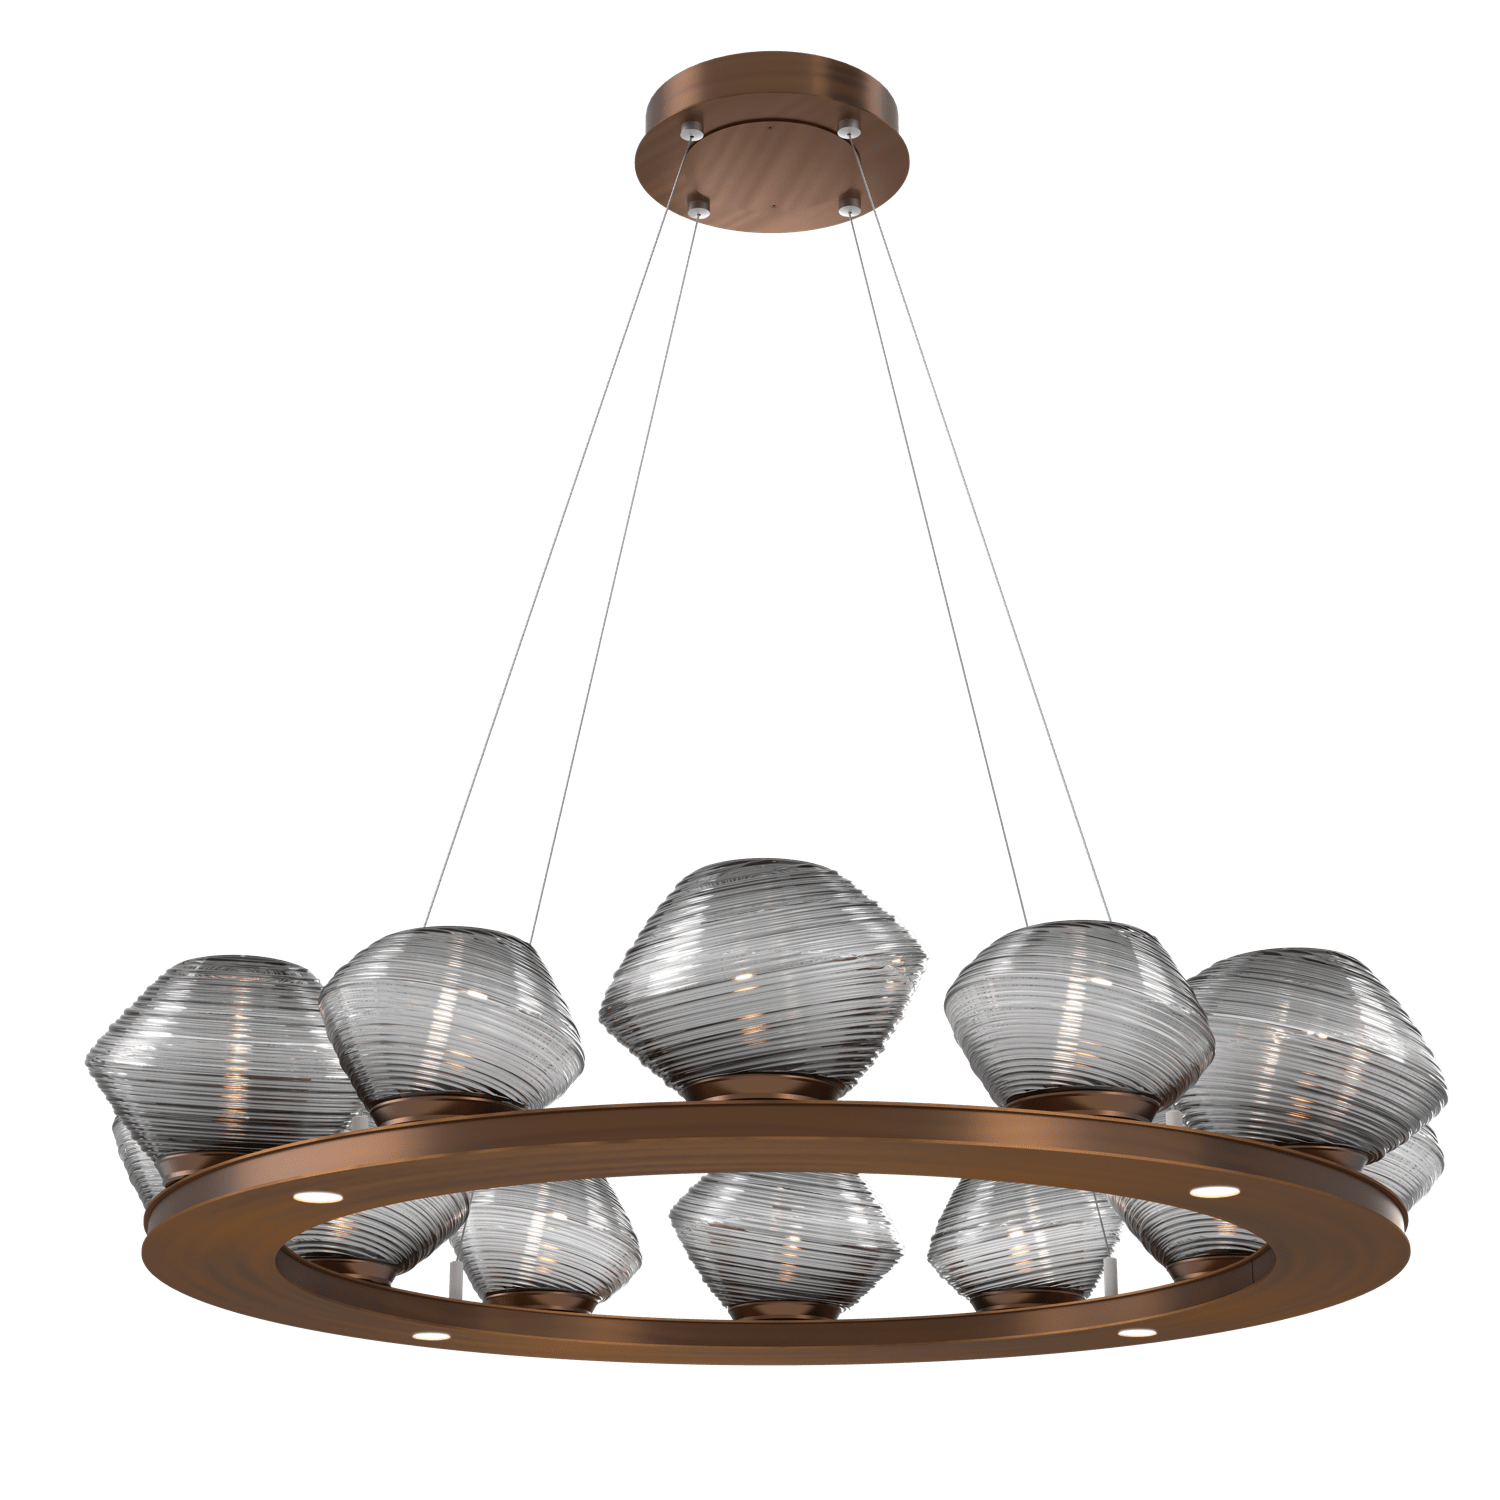 CHB0089-0C-RB-S-Hammerton-Studio-Mesa-36-inch-ring-chandelier-with-oil-rubbed-bronze-finish-and-smoke-blown-glass-shades-and-LED-lamping